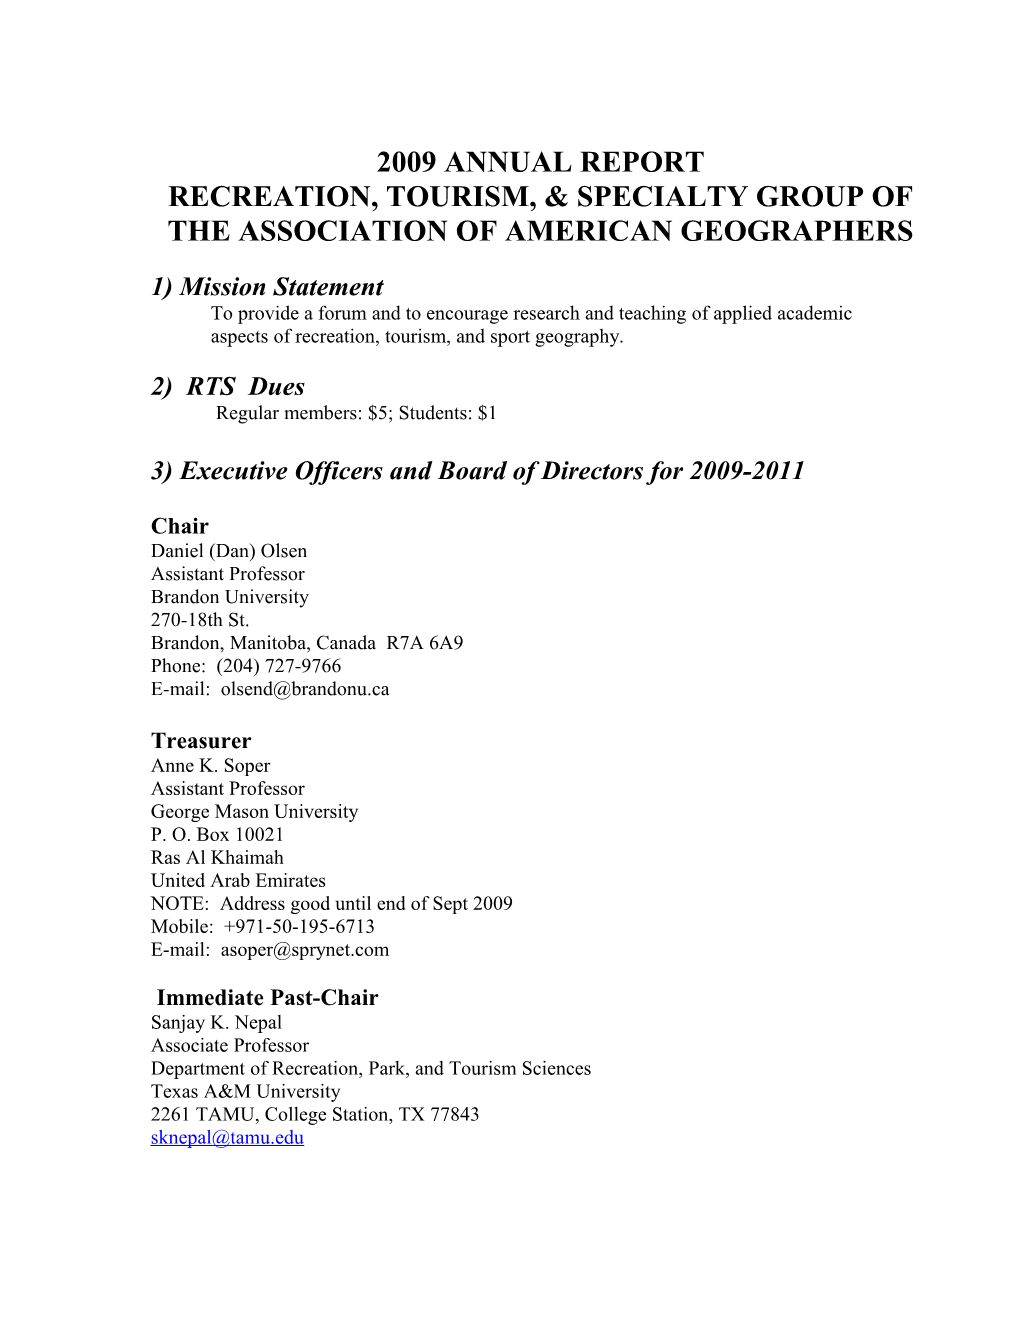 Recreation, Tourism, & Specialty Group of the Association of American Geographers